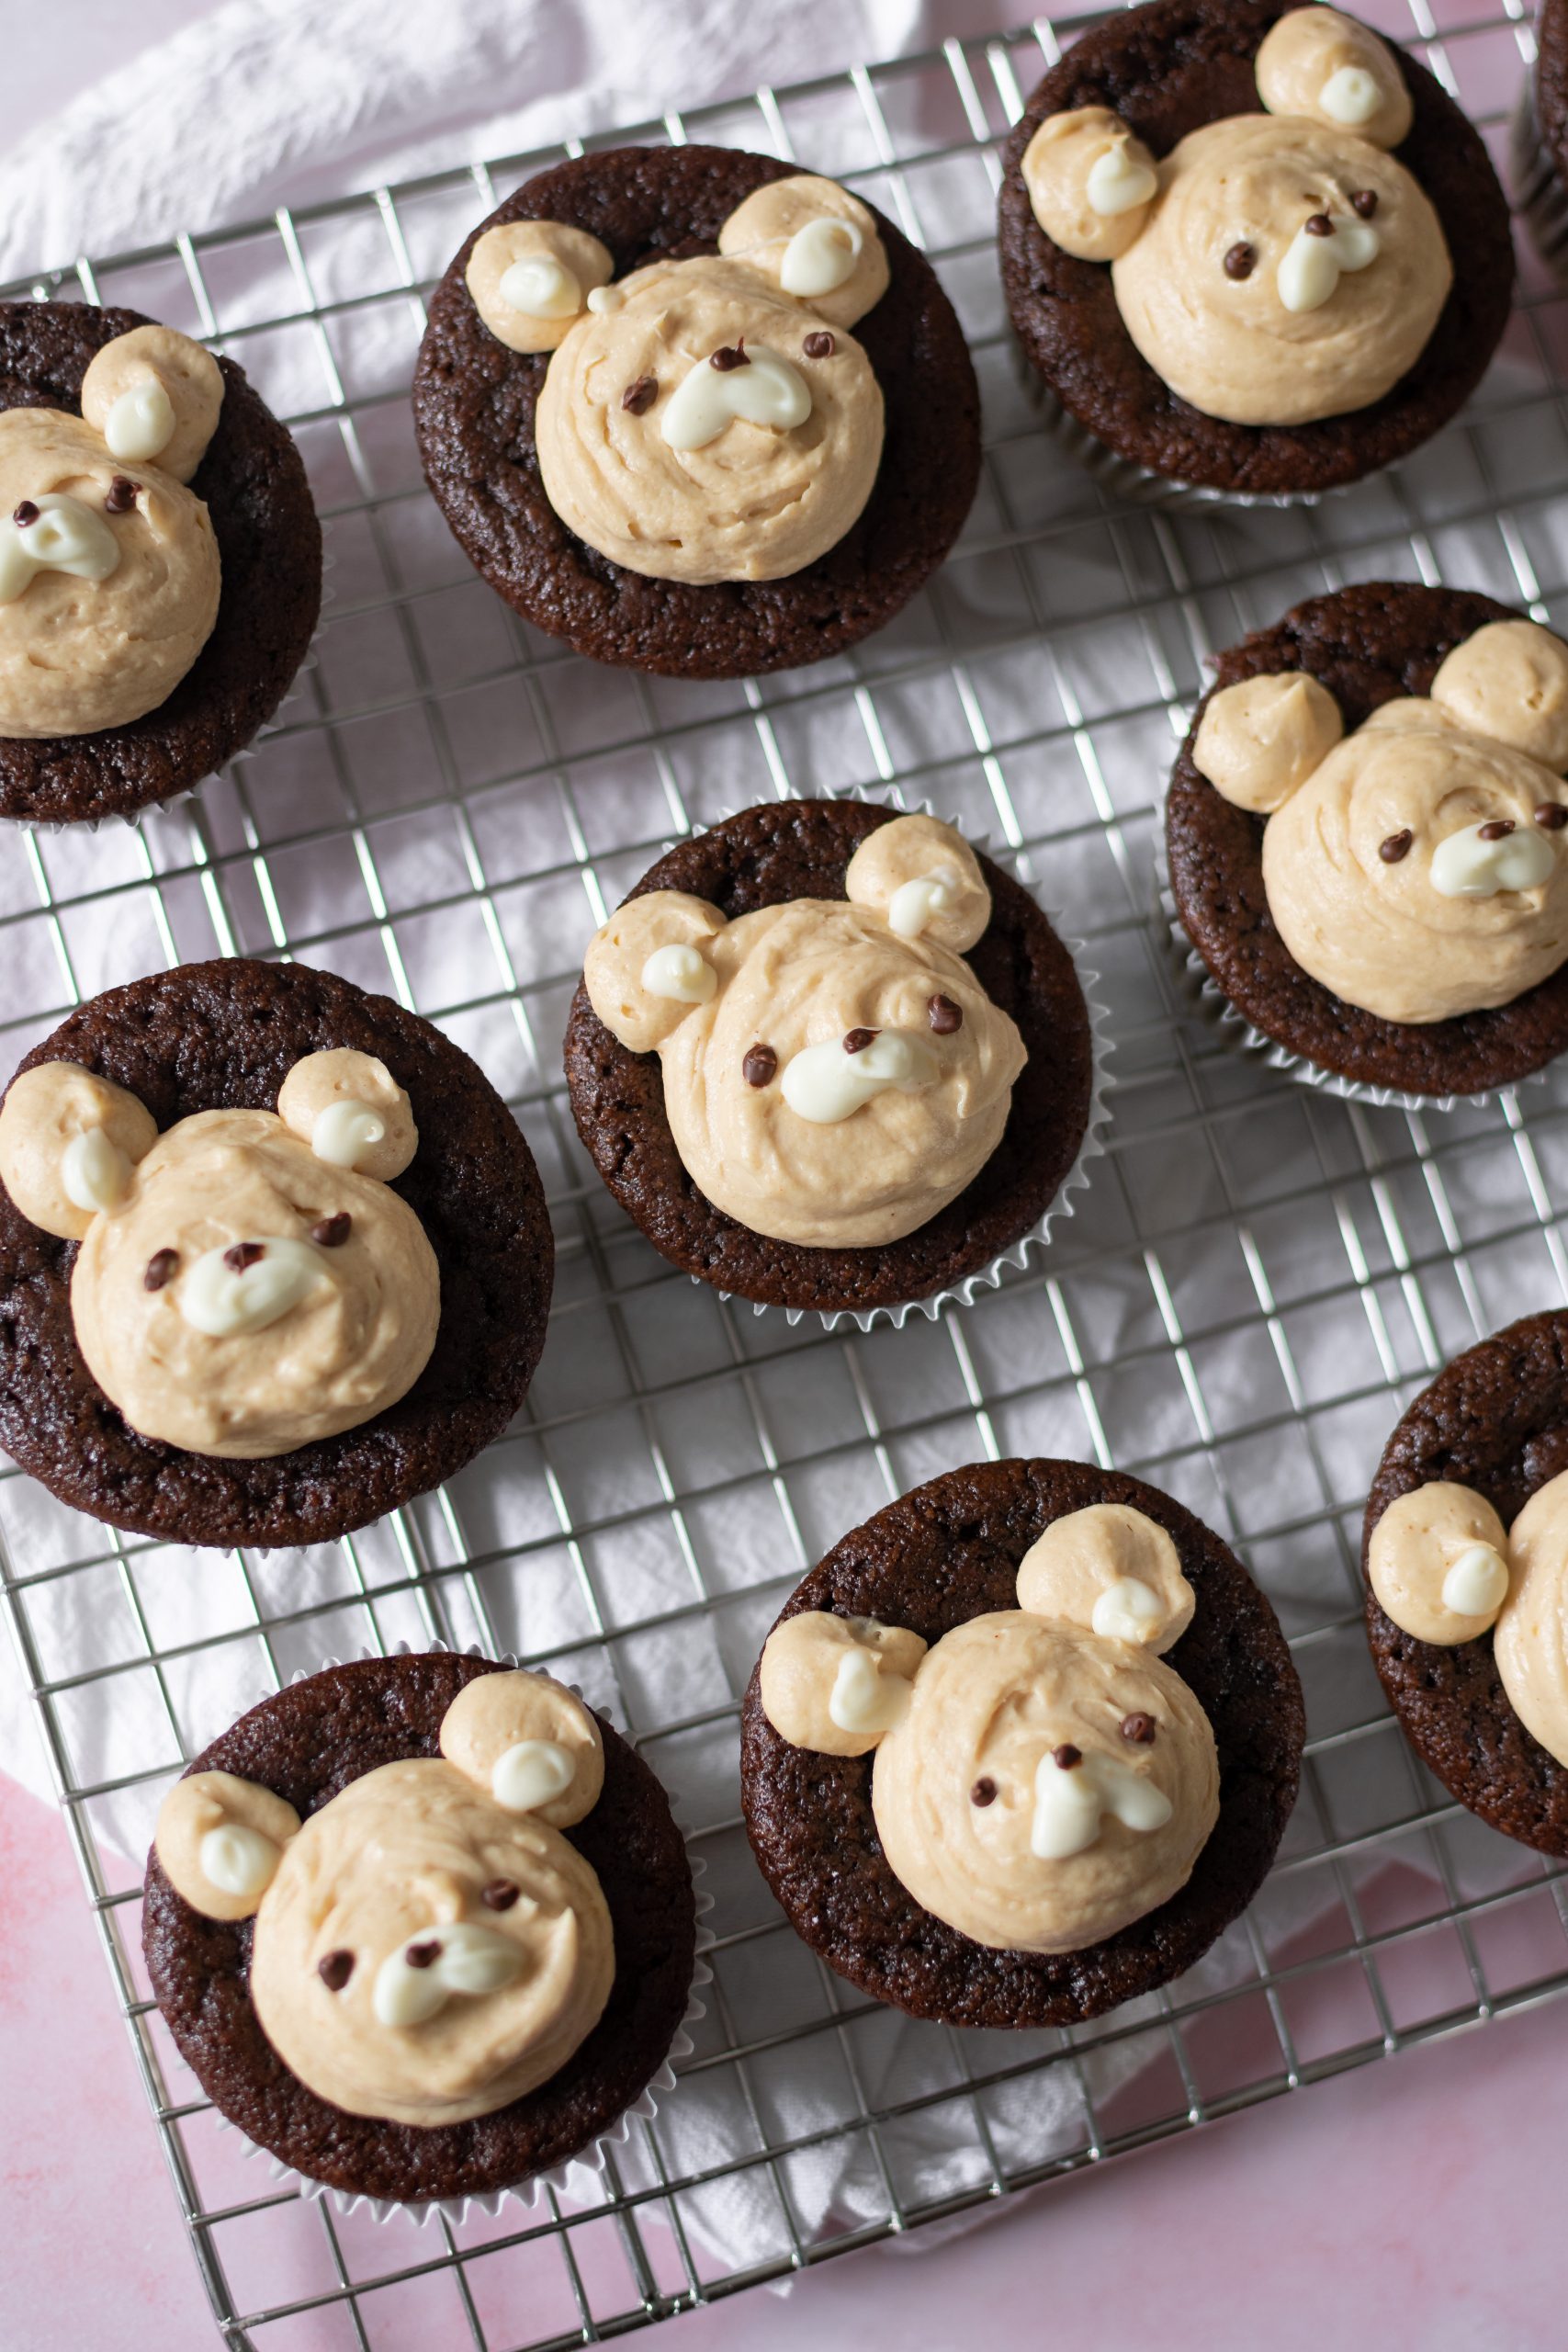 Almond Flour Chocolate Bear Cupcakes with Peanut Butter Whipped Cream Frosting